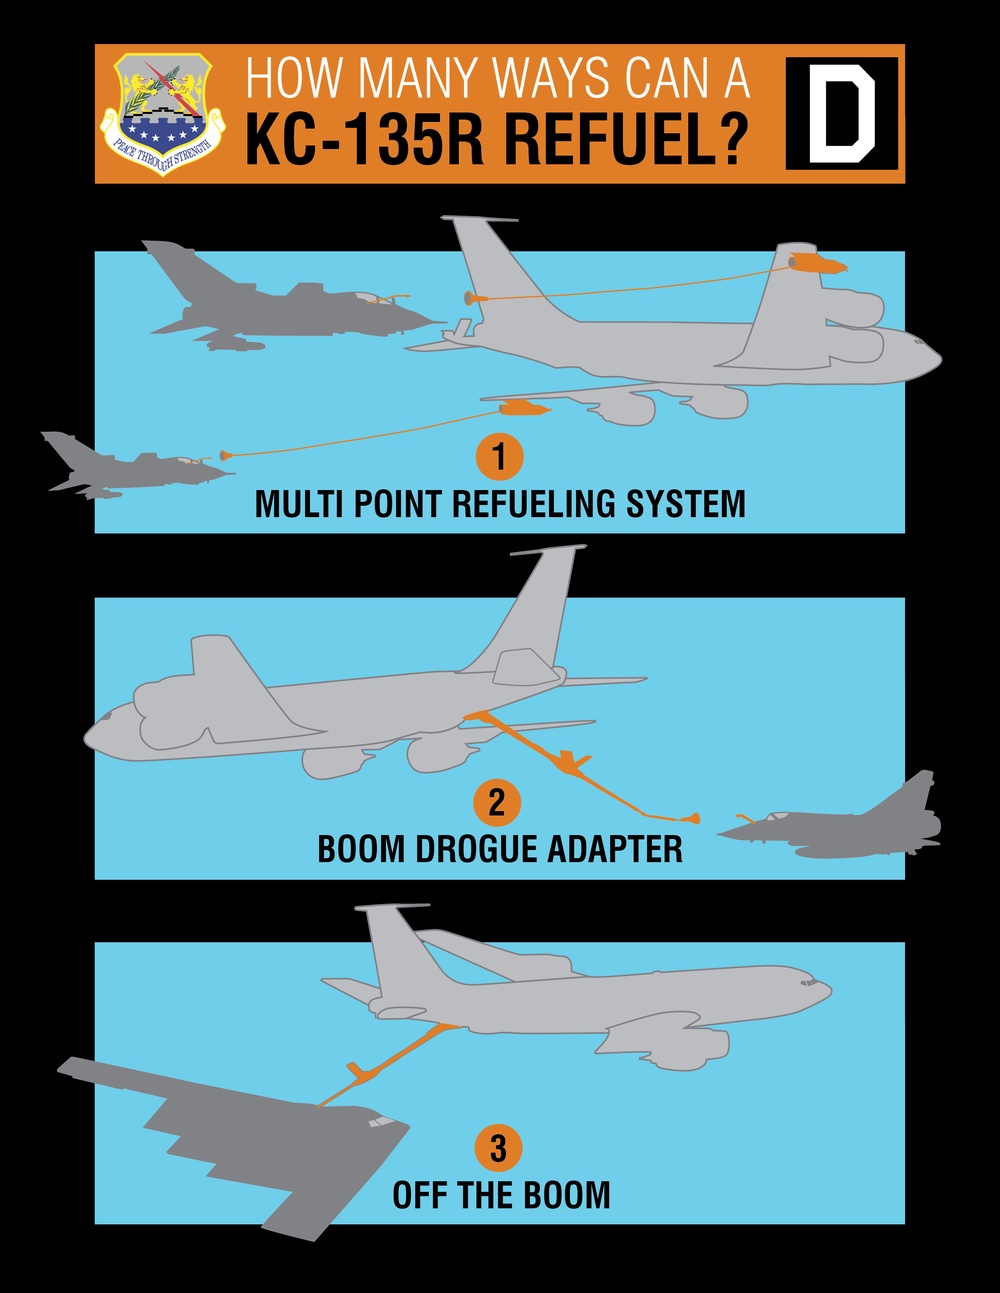 How many ways can a KC-135R refuel?